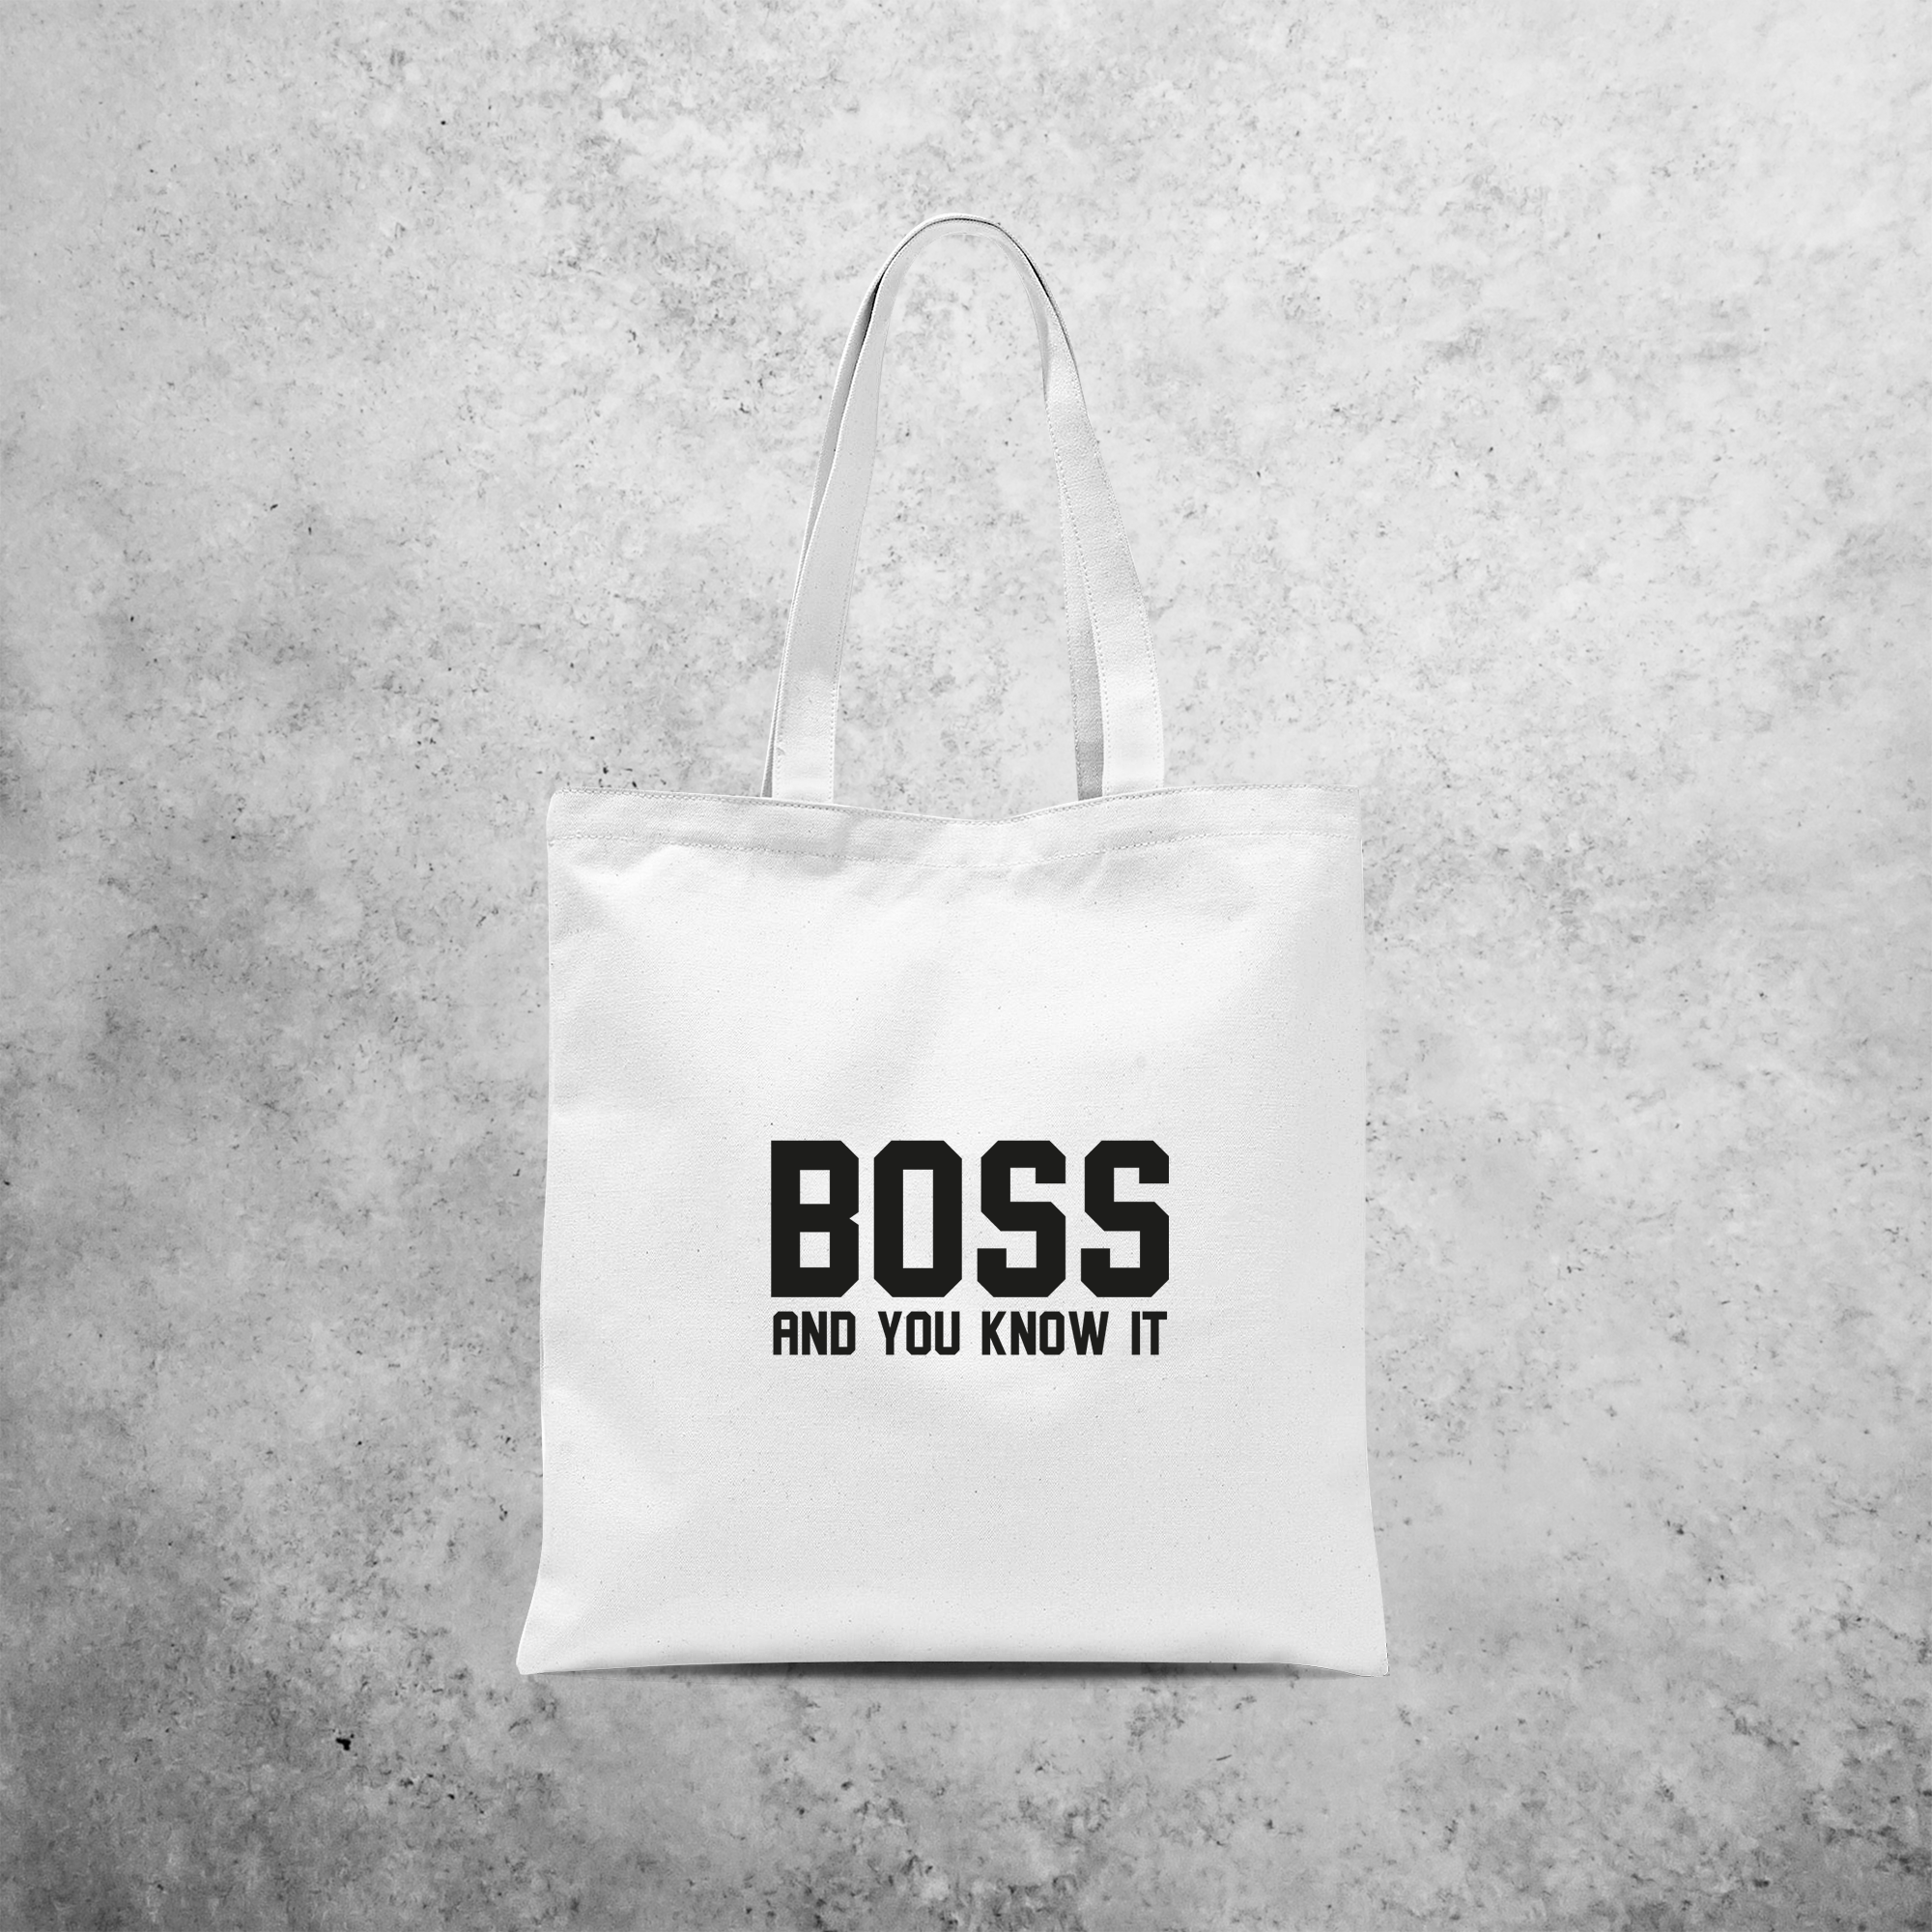 'Boss and you know it' tote bag